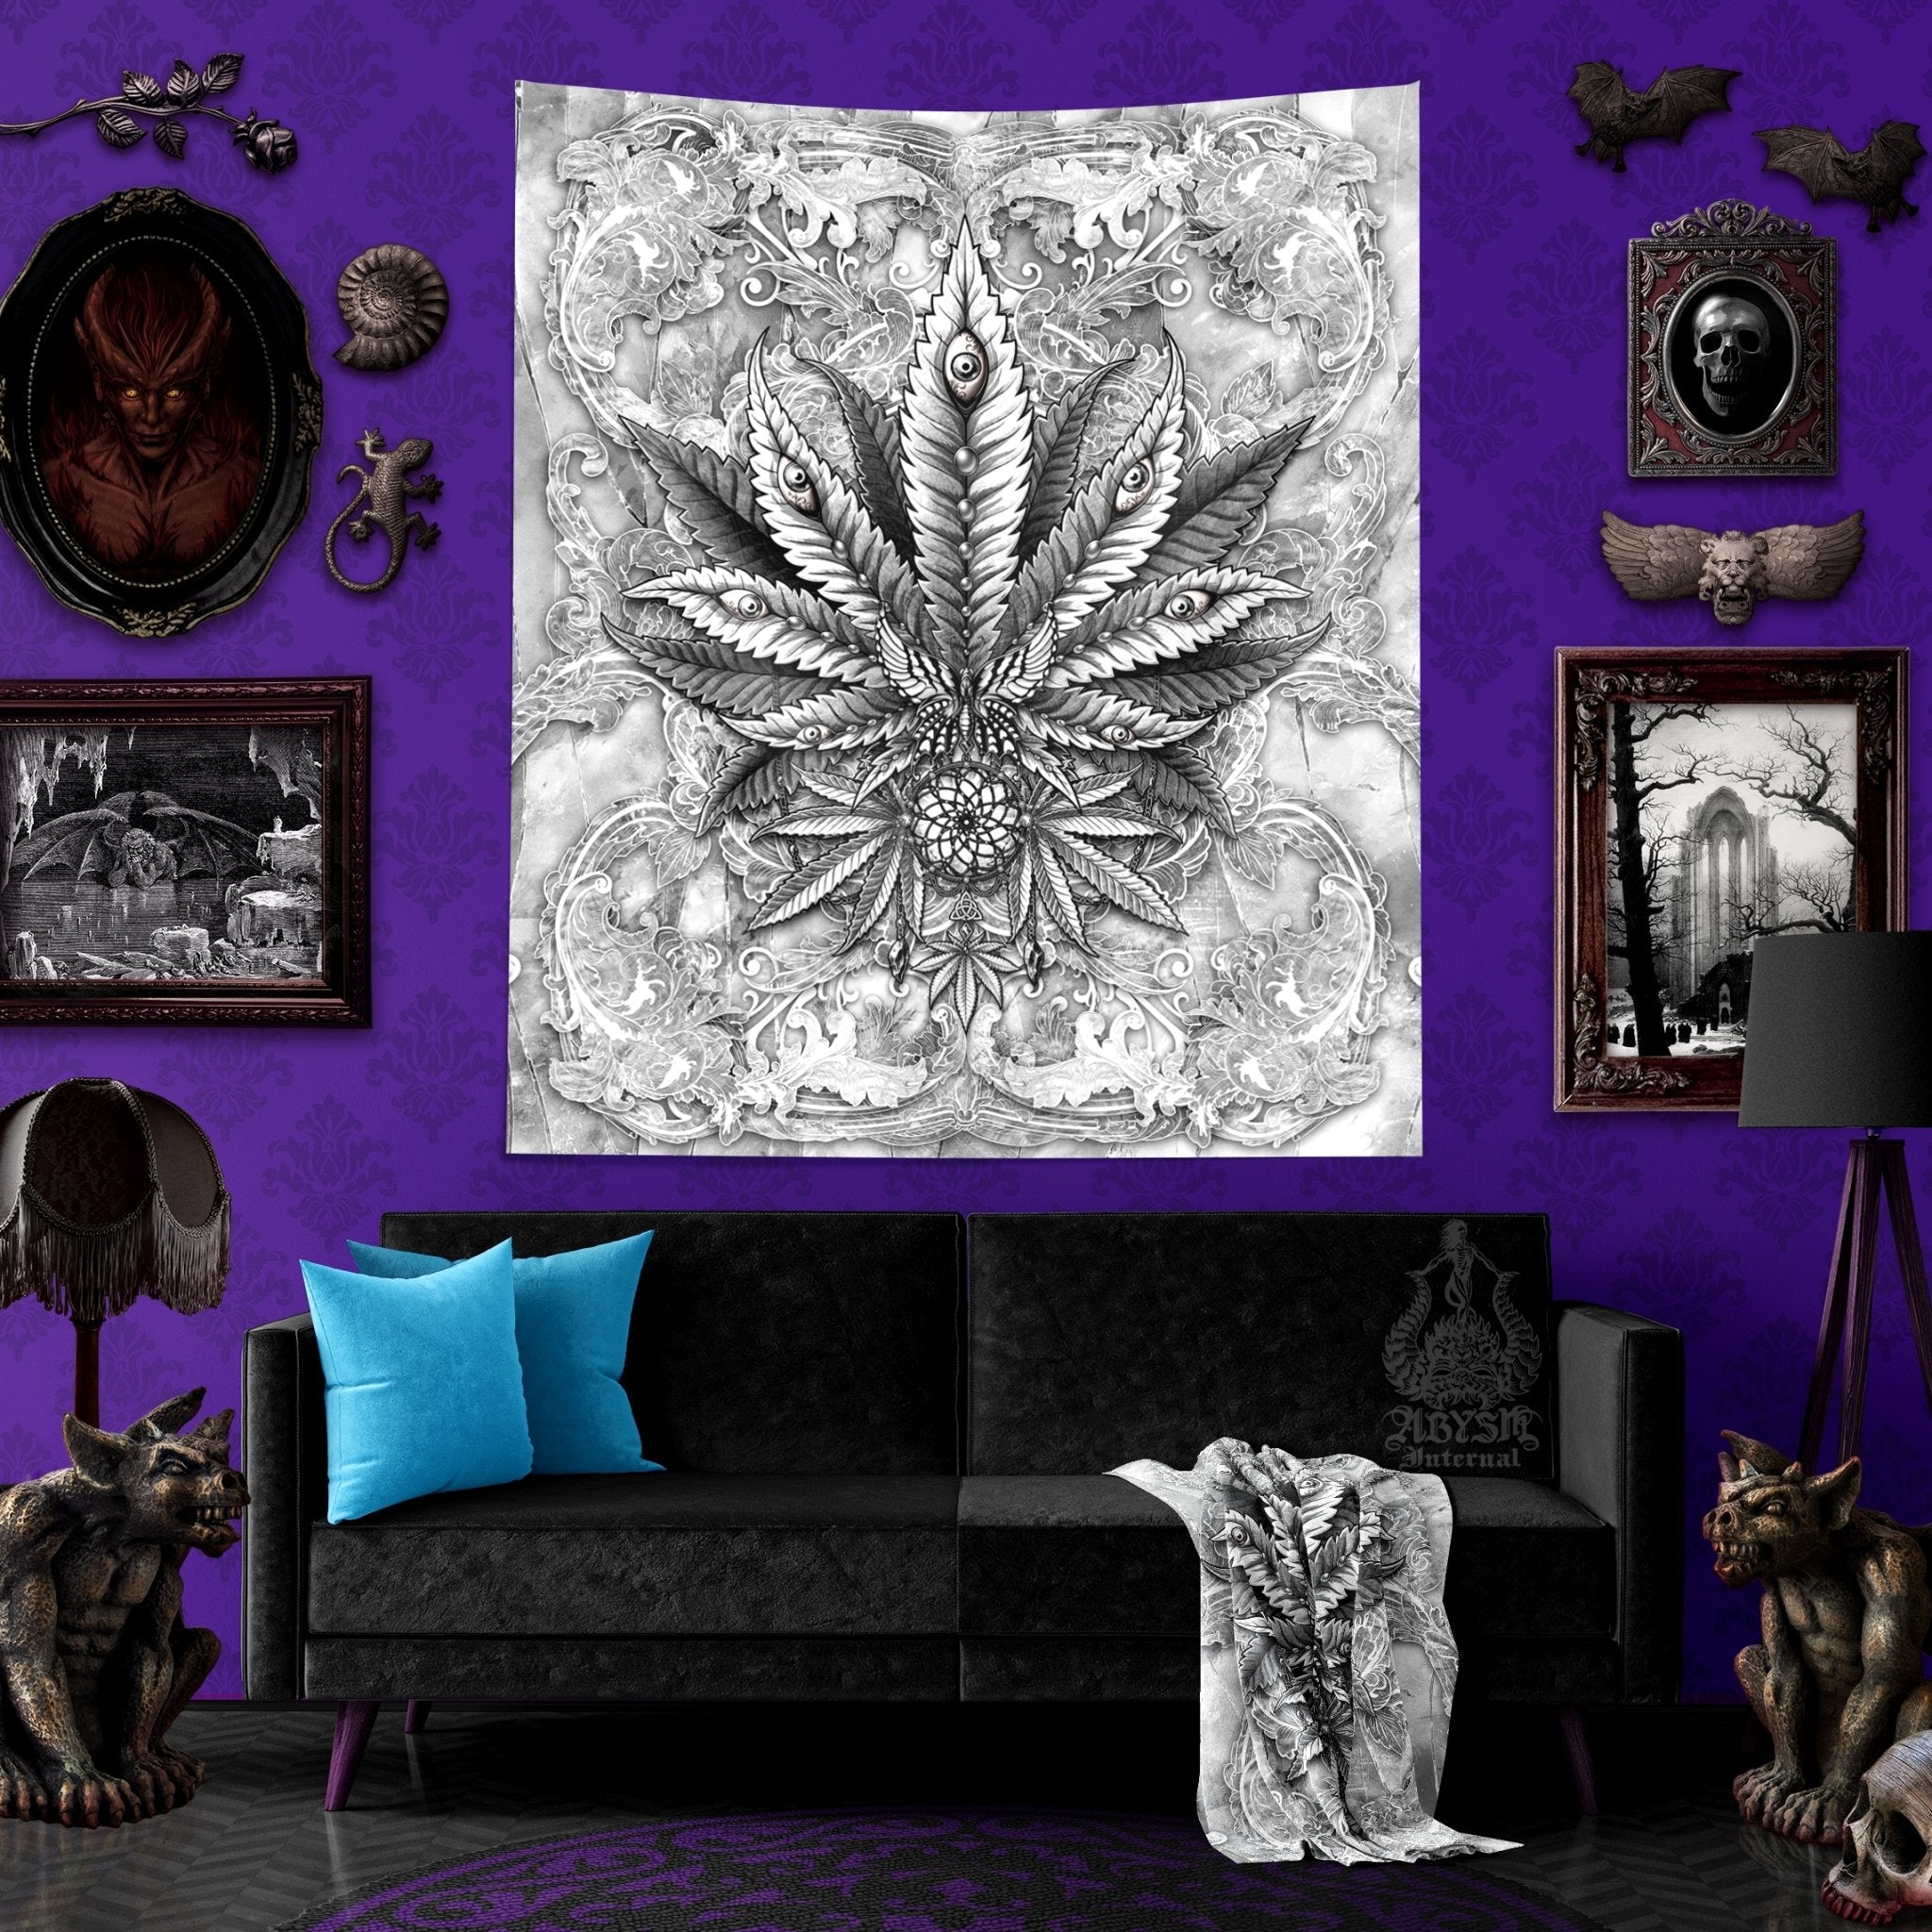 Weed Tapestry, Cannabis Shop Decor, Marijuana Wall Hanging, Indie Home Decor, White Goth Art Print, 420 Gift - Stone - Abysm Internal